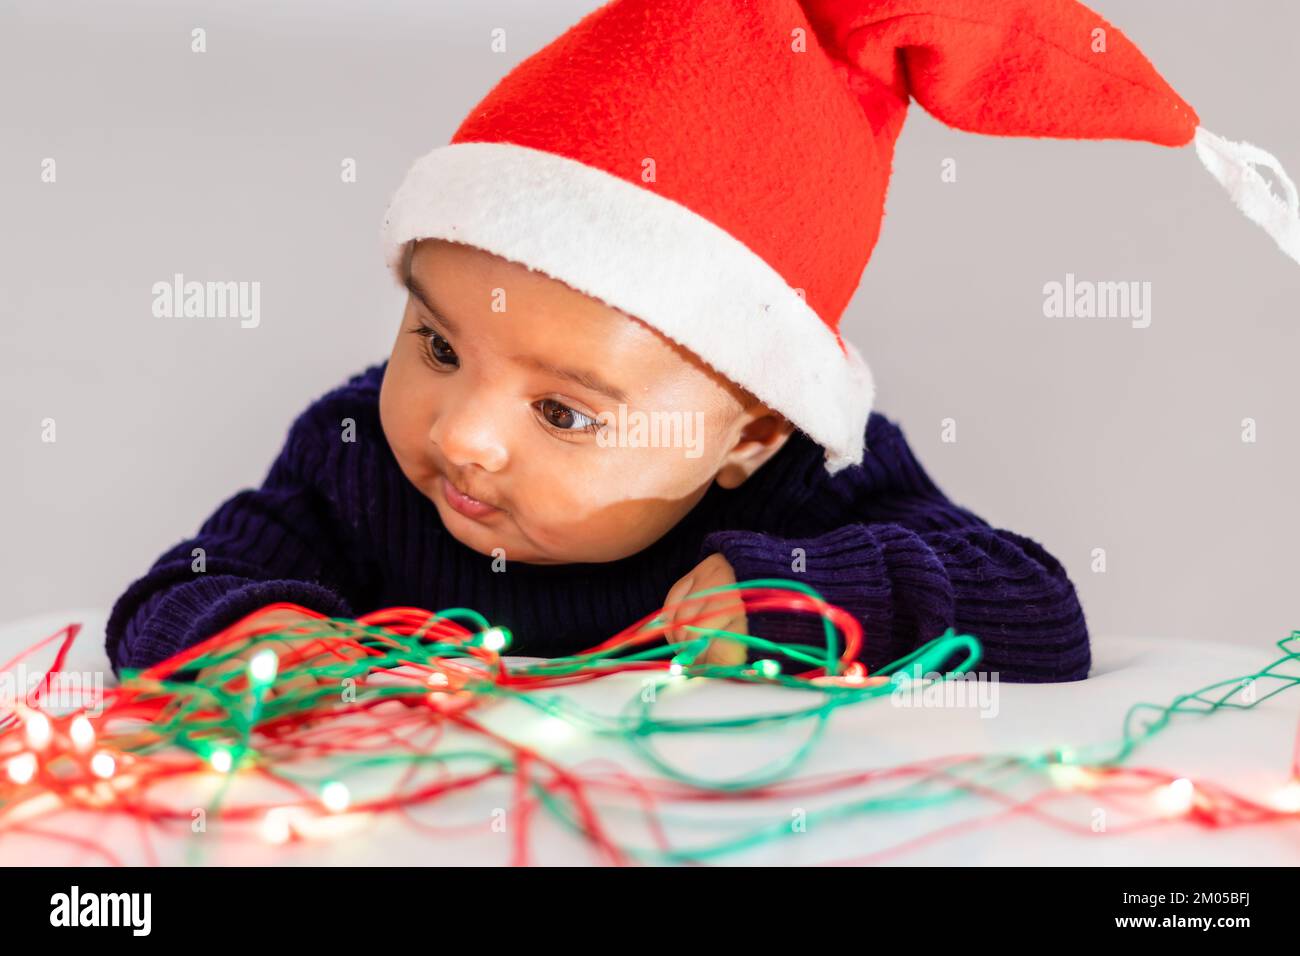 infant boy wearing Christmas red cap playing cute facial expression with white background at indoor Stock Photo